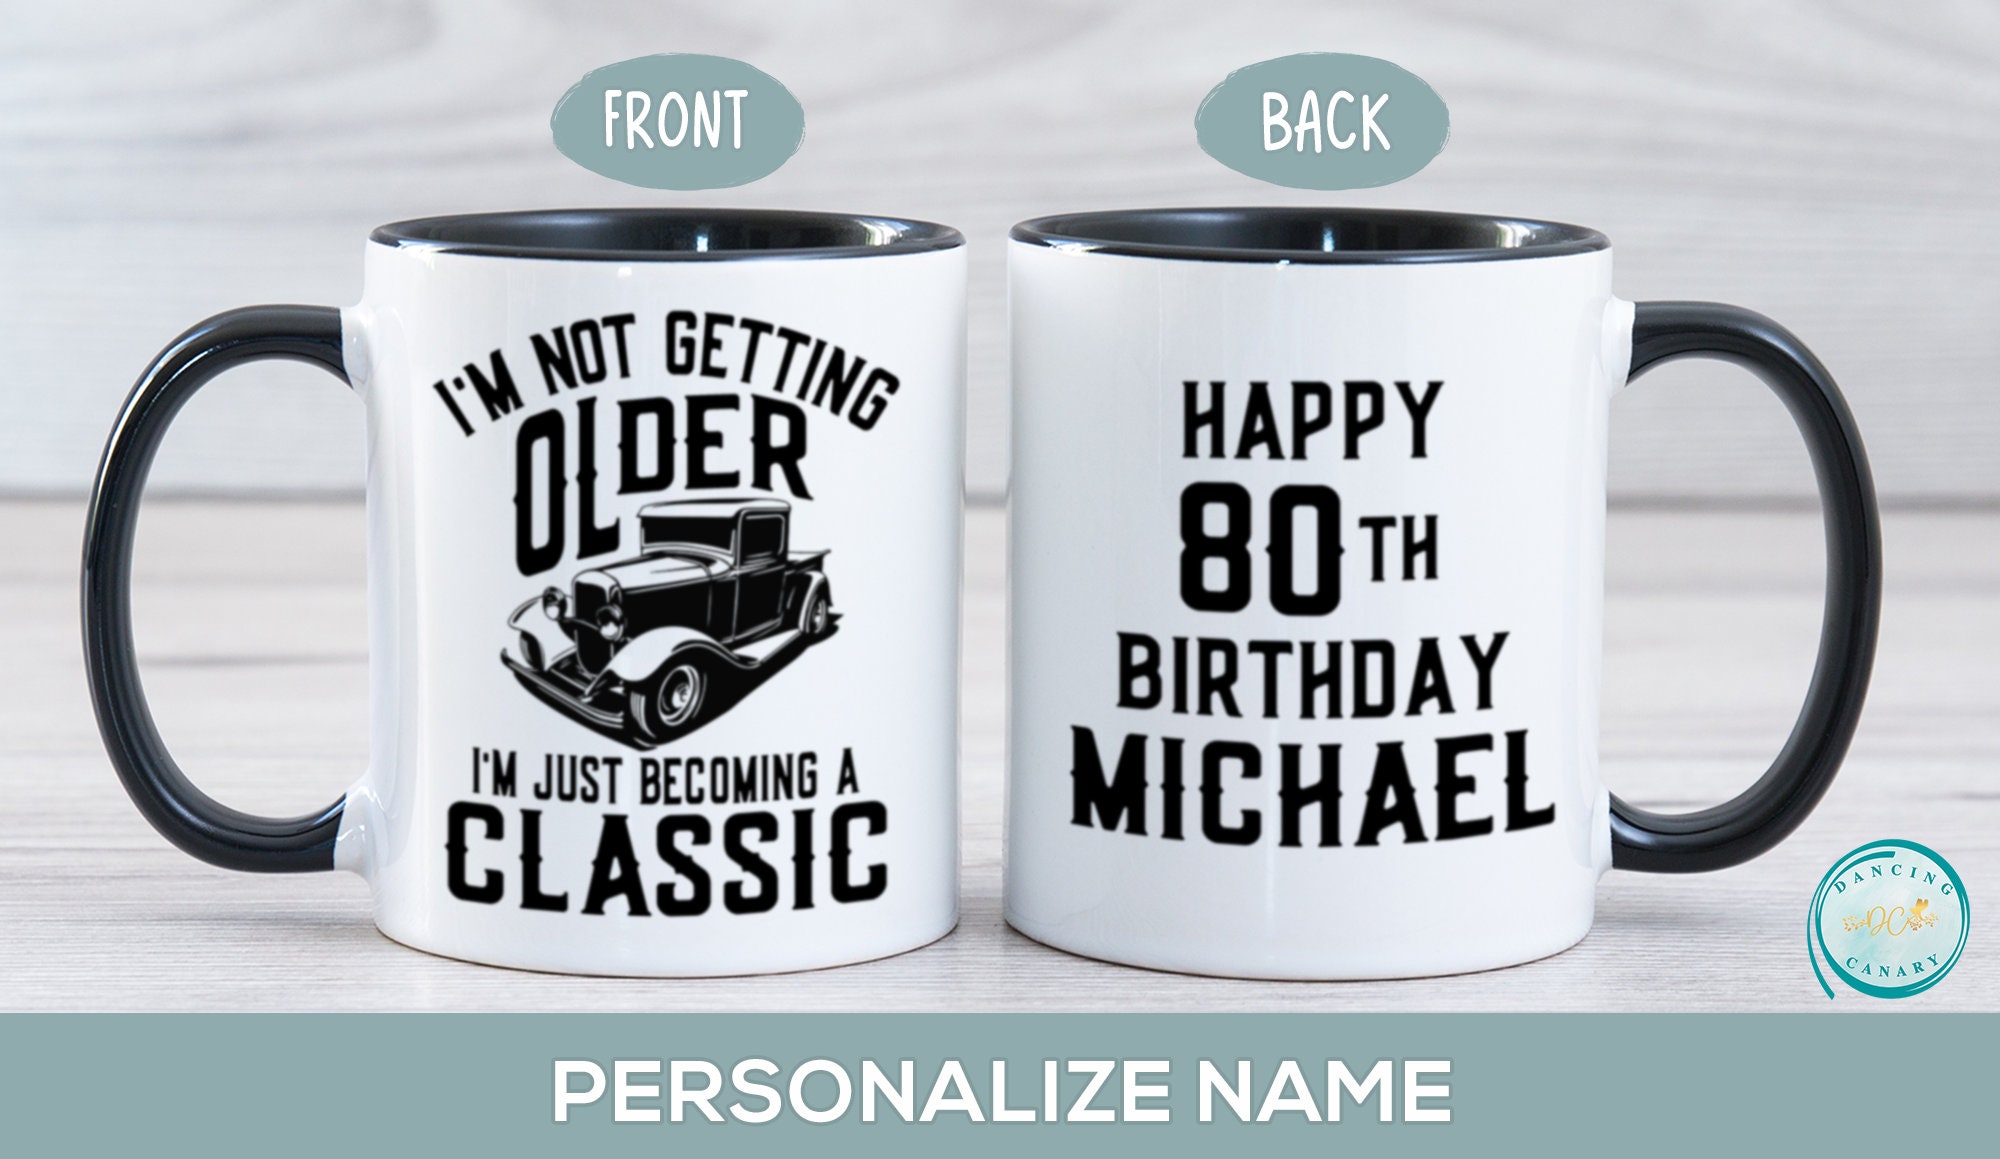 Ransalex Funny 80th Birthday Gifts - I Am 79 Plus Middle Finger Coffee Mug  - Gag Novelty Cup - Eight…See more Ransalex Funny 80th Birthday Gifts - I